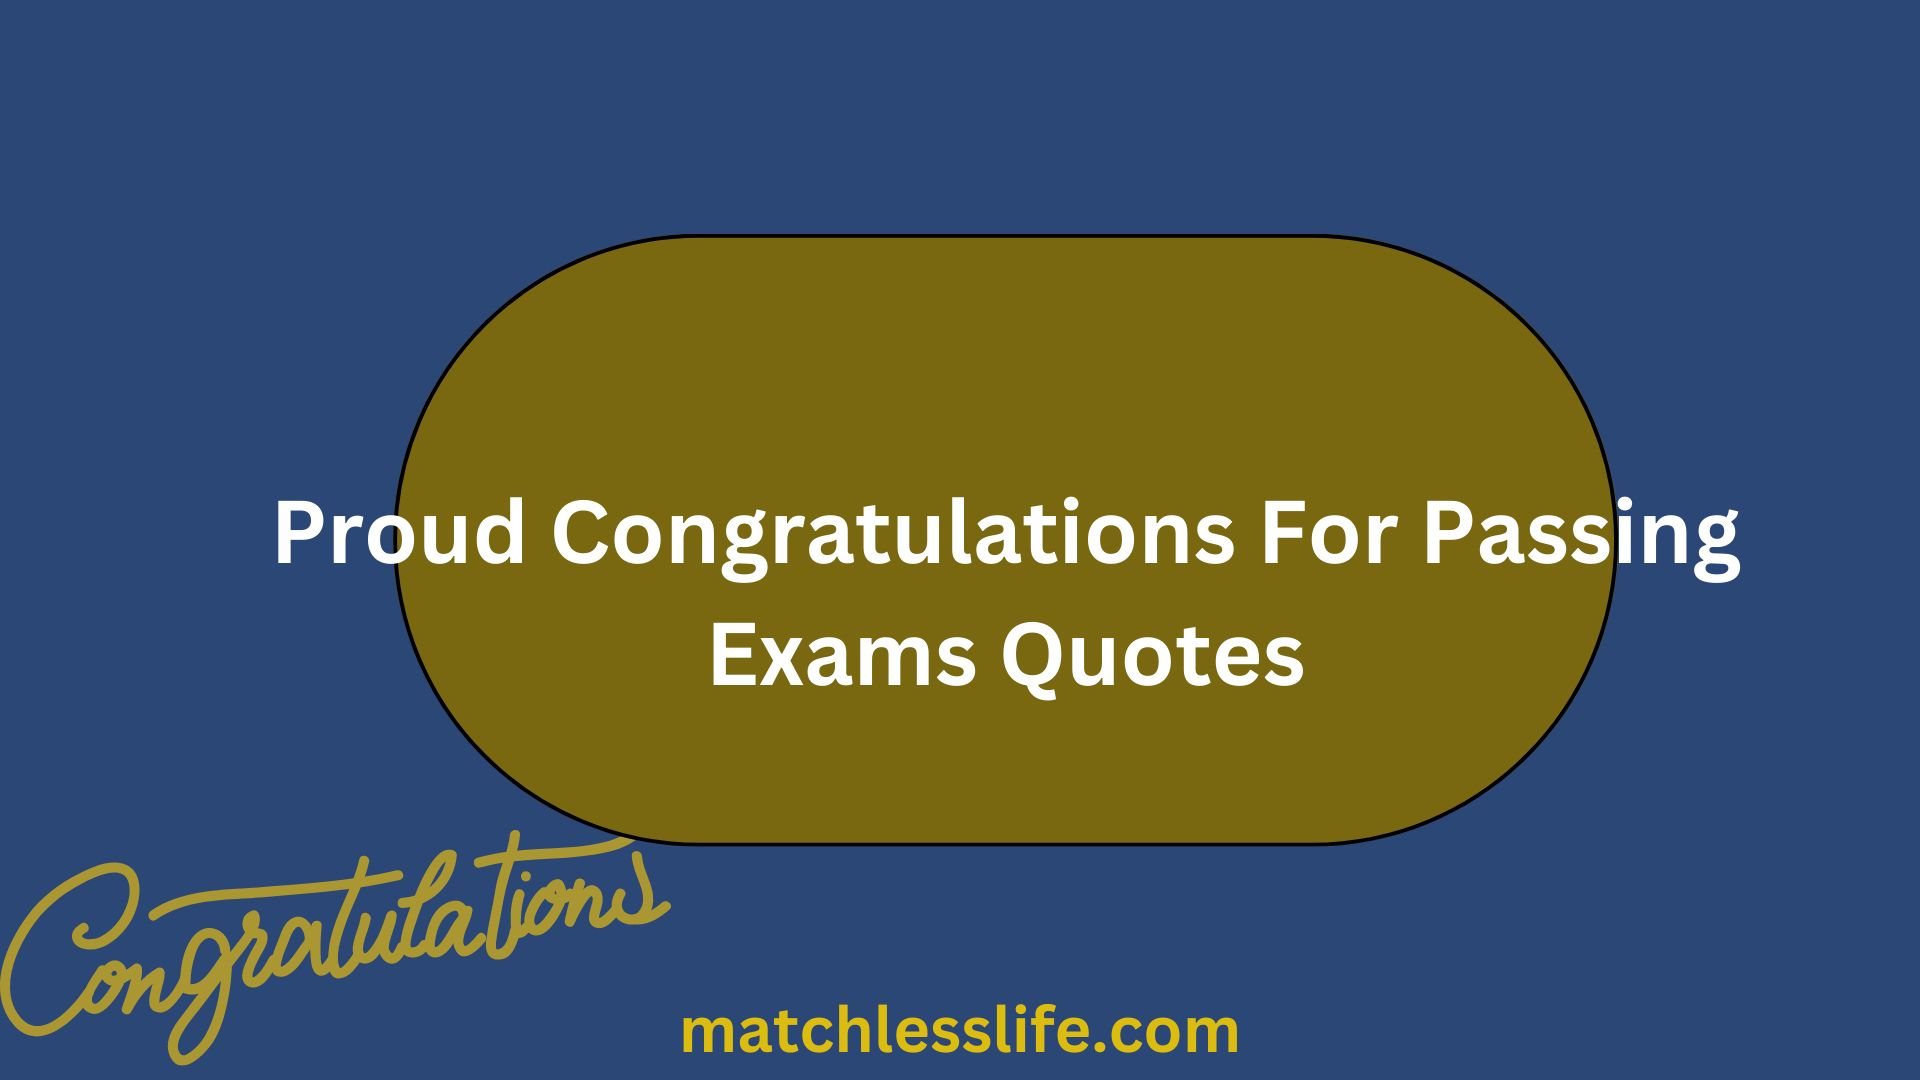 Proud Congratulations For Passing Exams Quotes